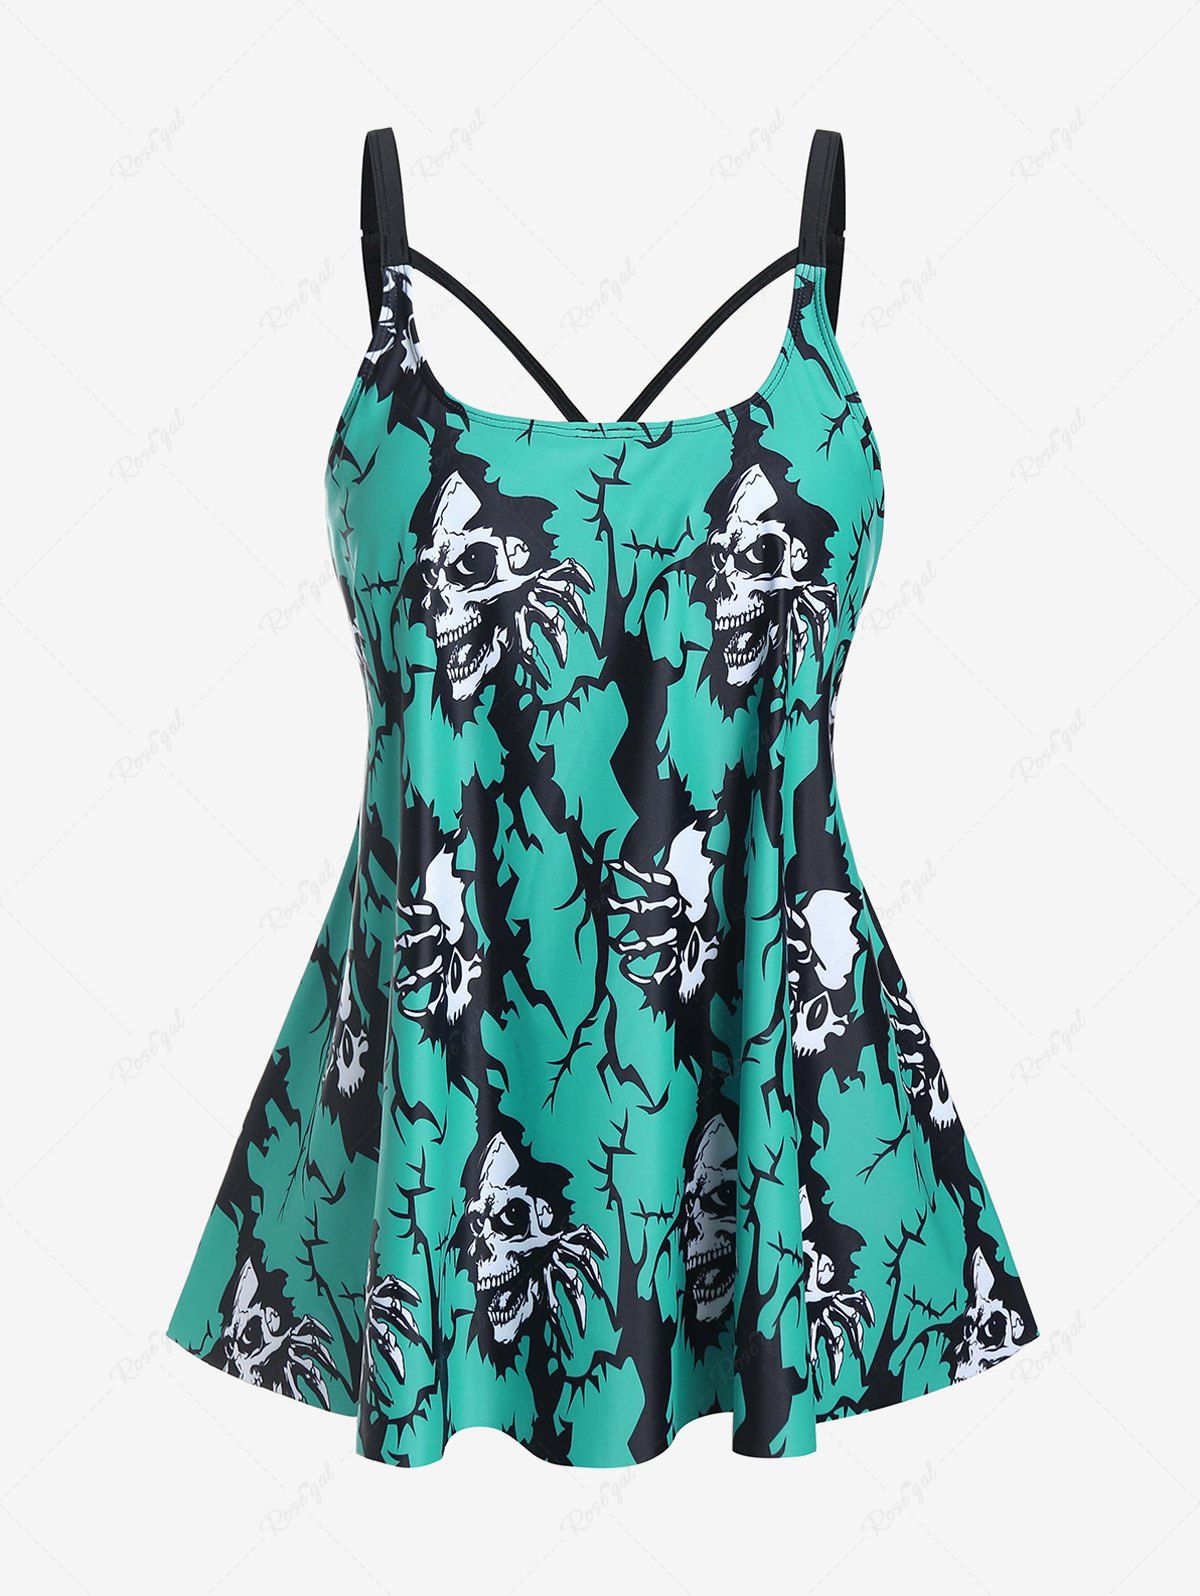 Chic Plus Size Gothic Skulls Printed Padded Backless Tankini Top Swimsuit  